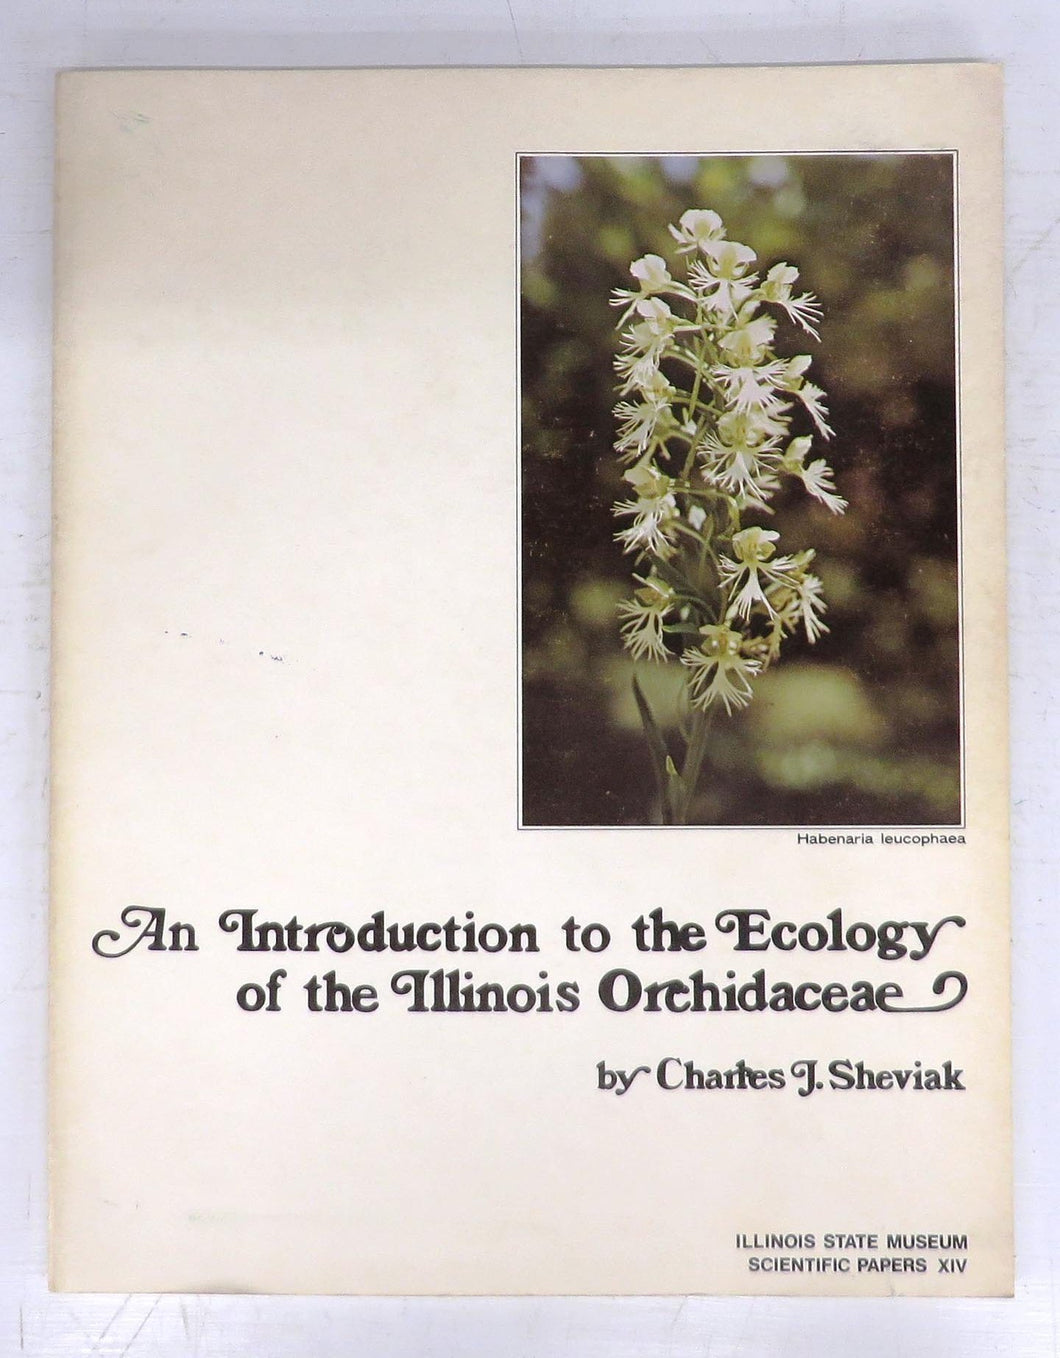 An Introduction to the Ecology of the Illinois Orchidaceae